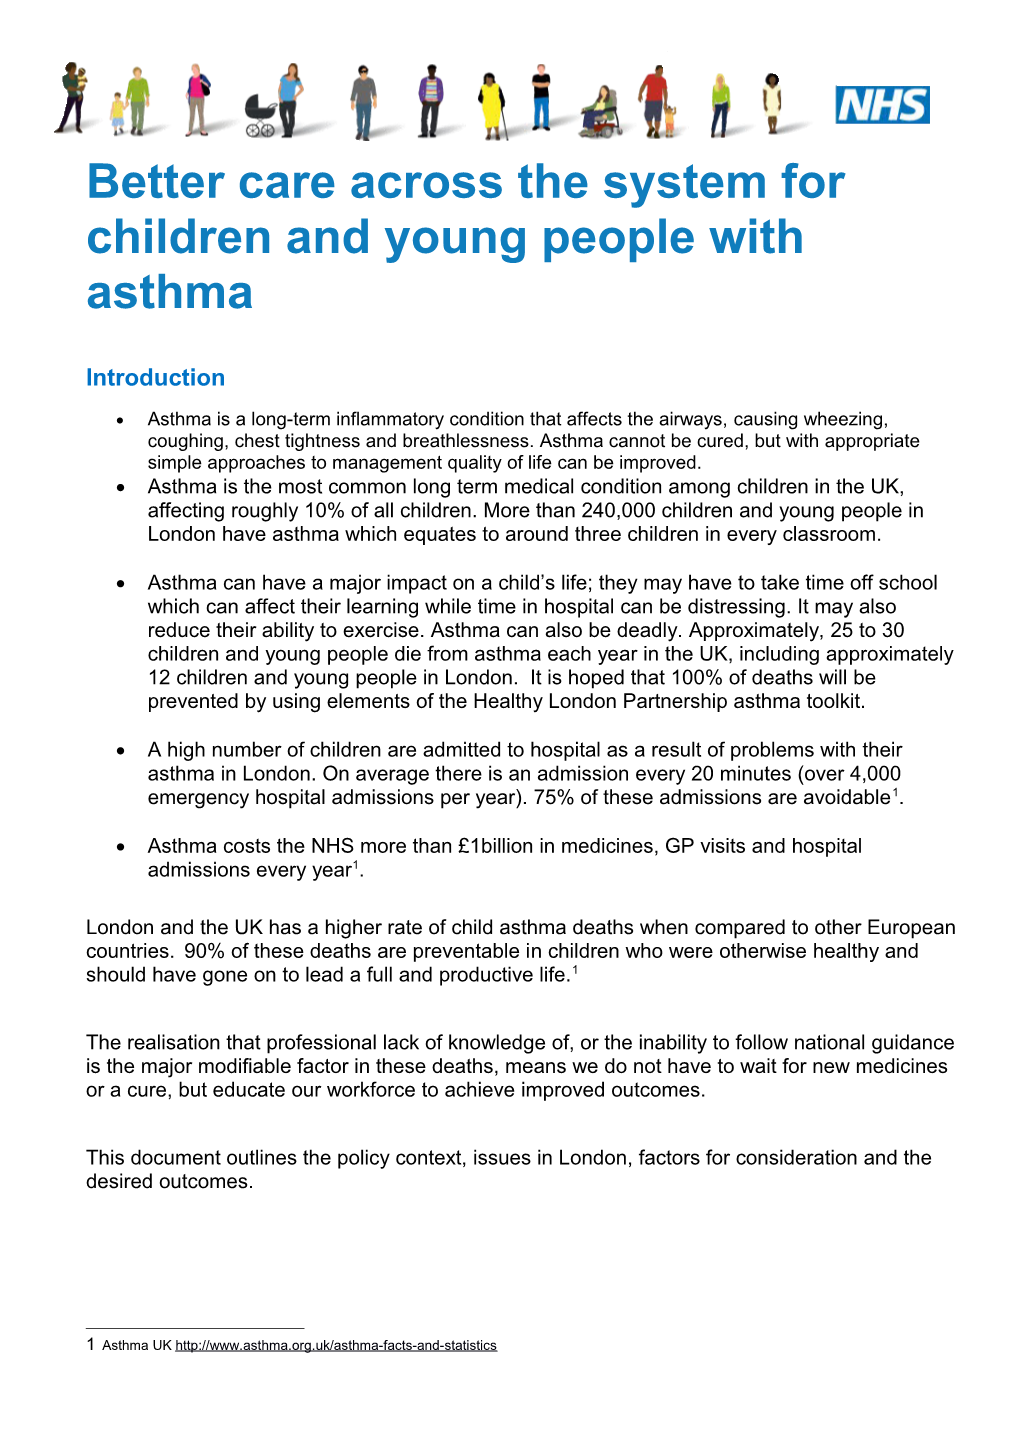 Better Care Across the System for Children and Young People with Asthma